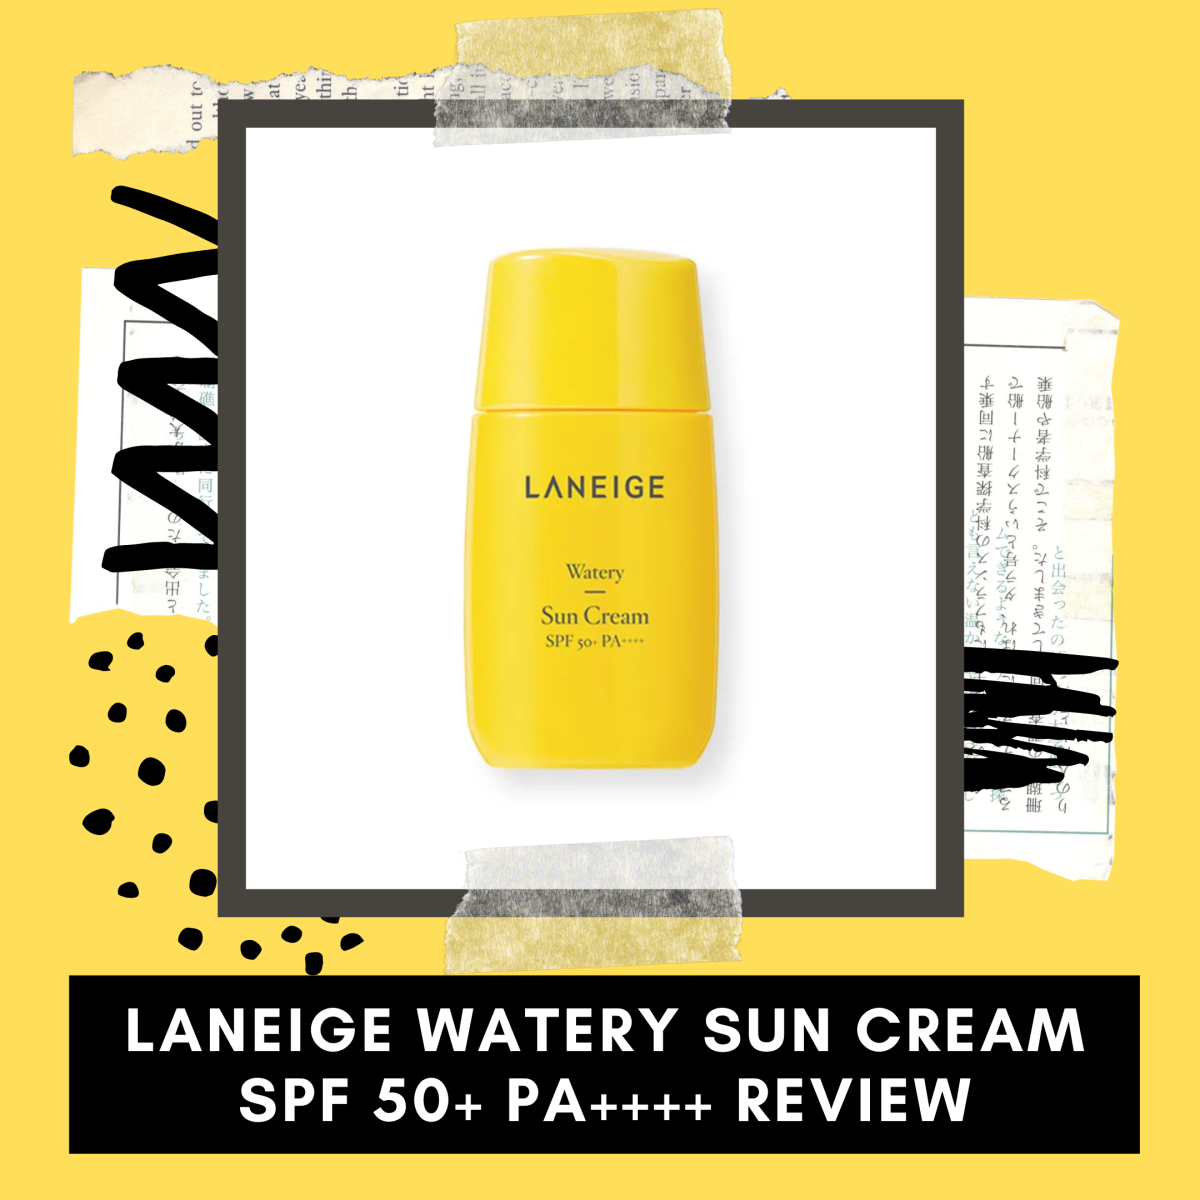 laneige-watery-sun-cream-spf-50-pa-review